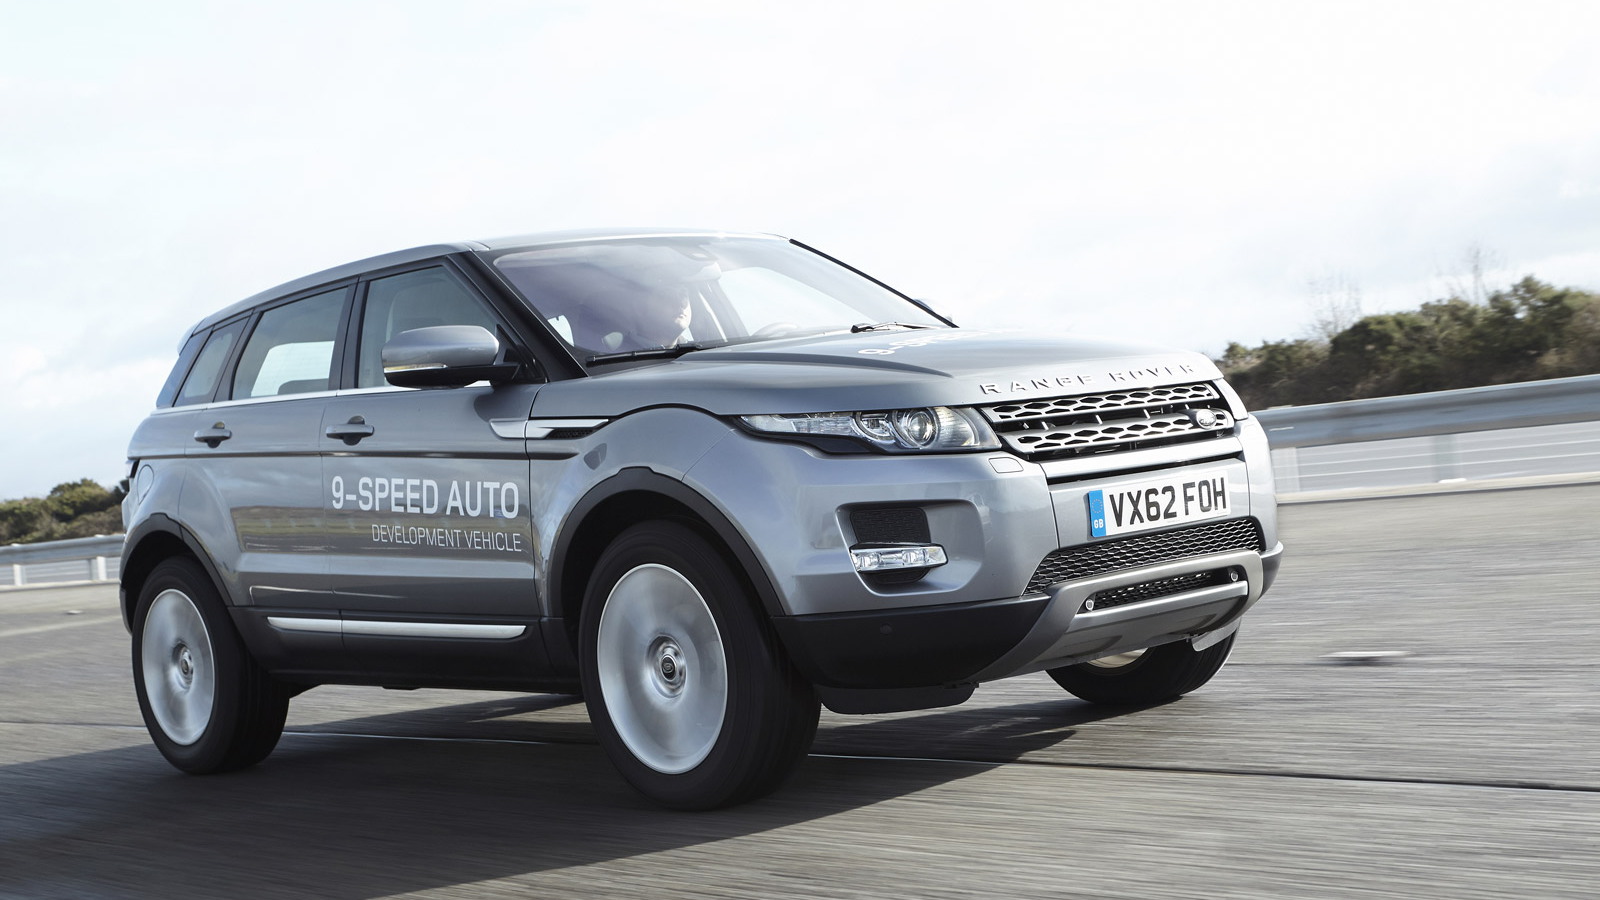 Land Rover Range Rover Evoque fitted with ZF 9HP nine-speed automatic transmission